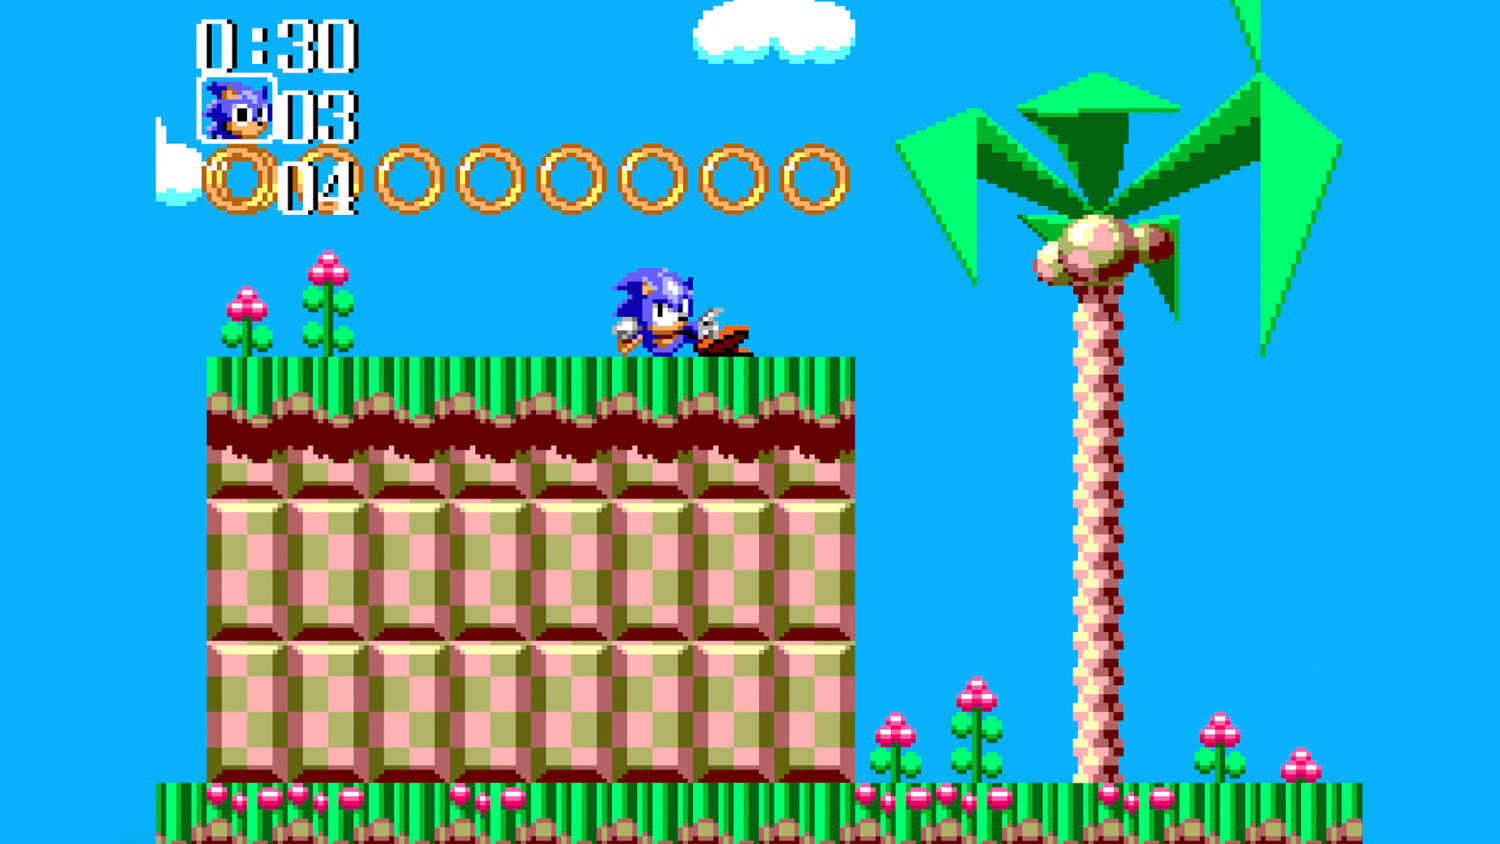 Master System - Sonic Chaos